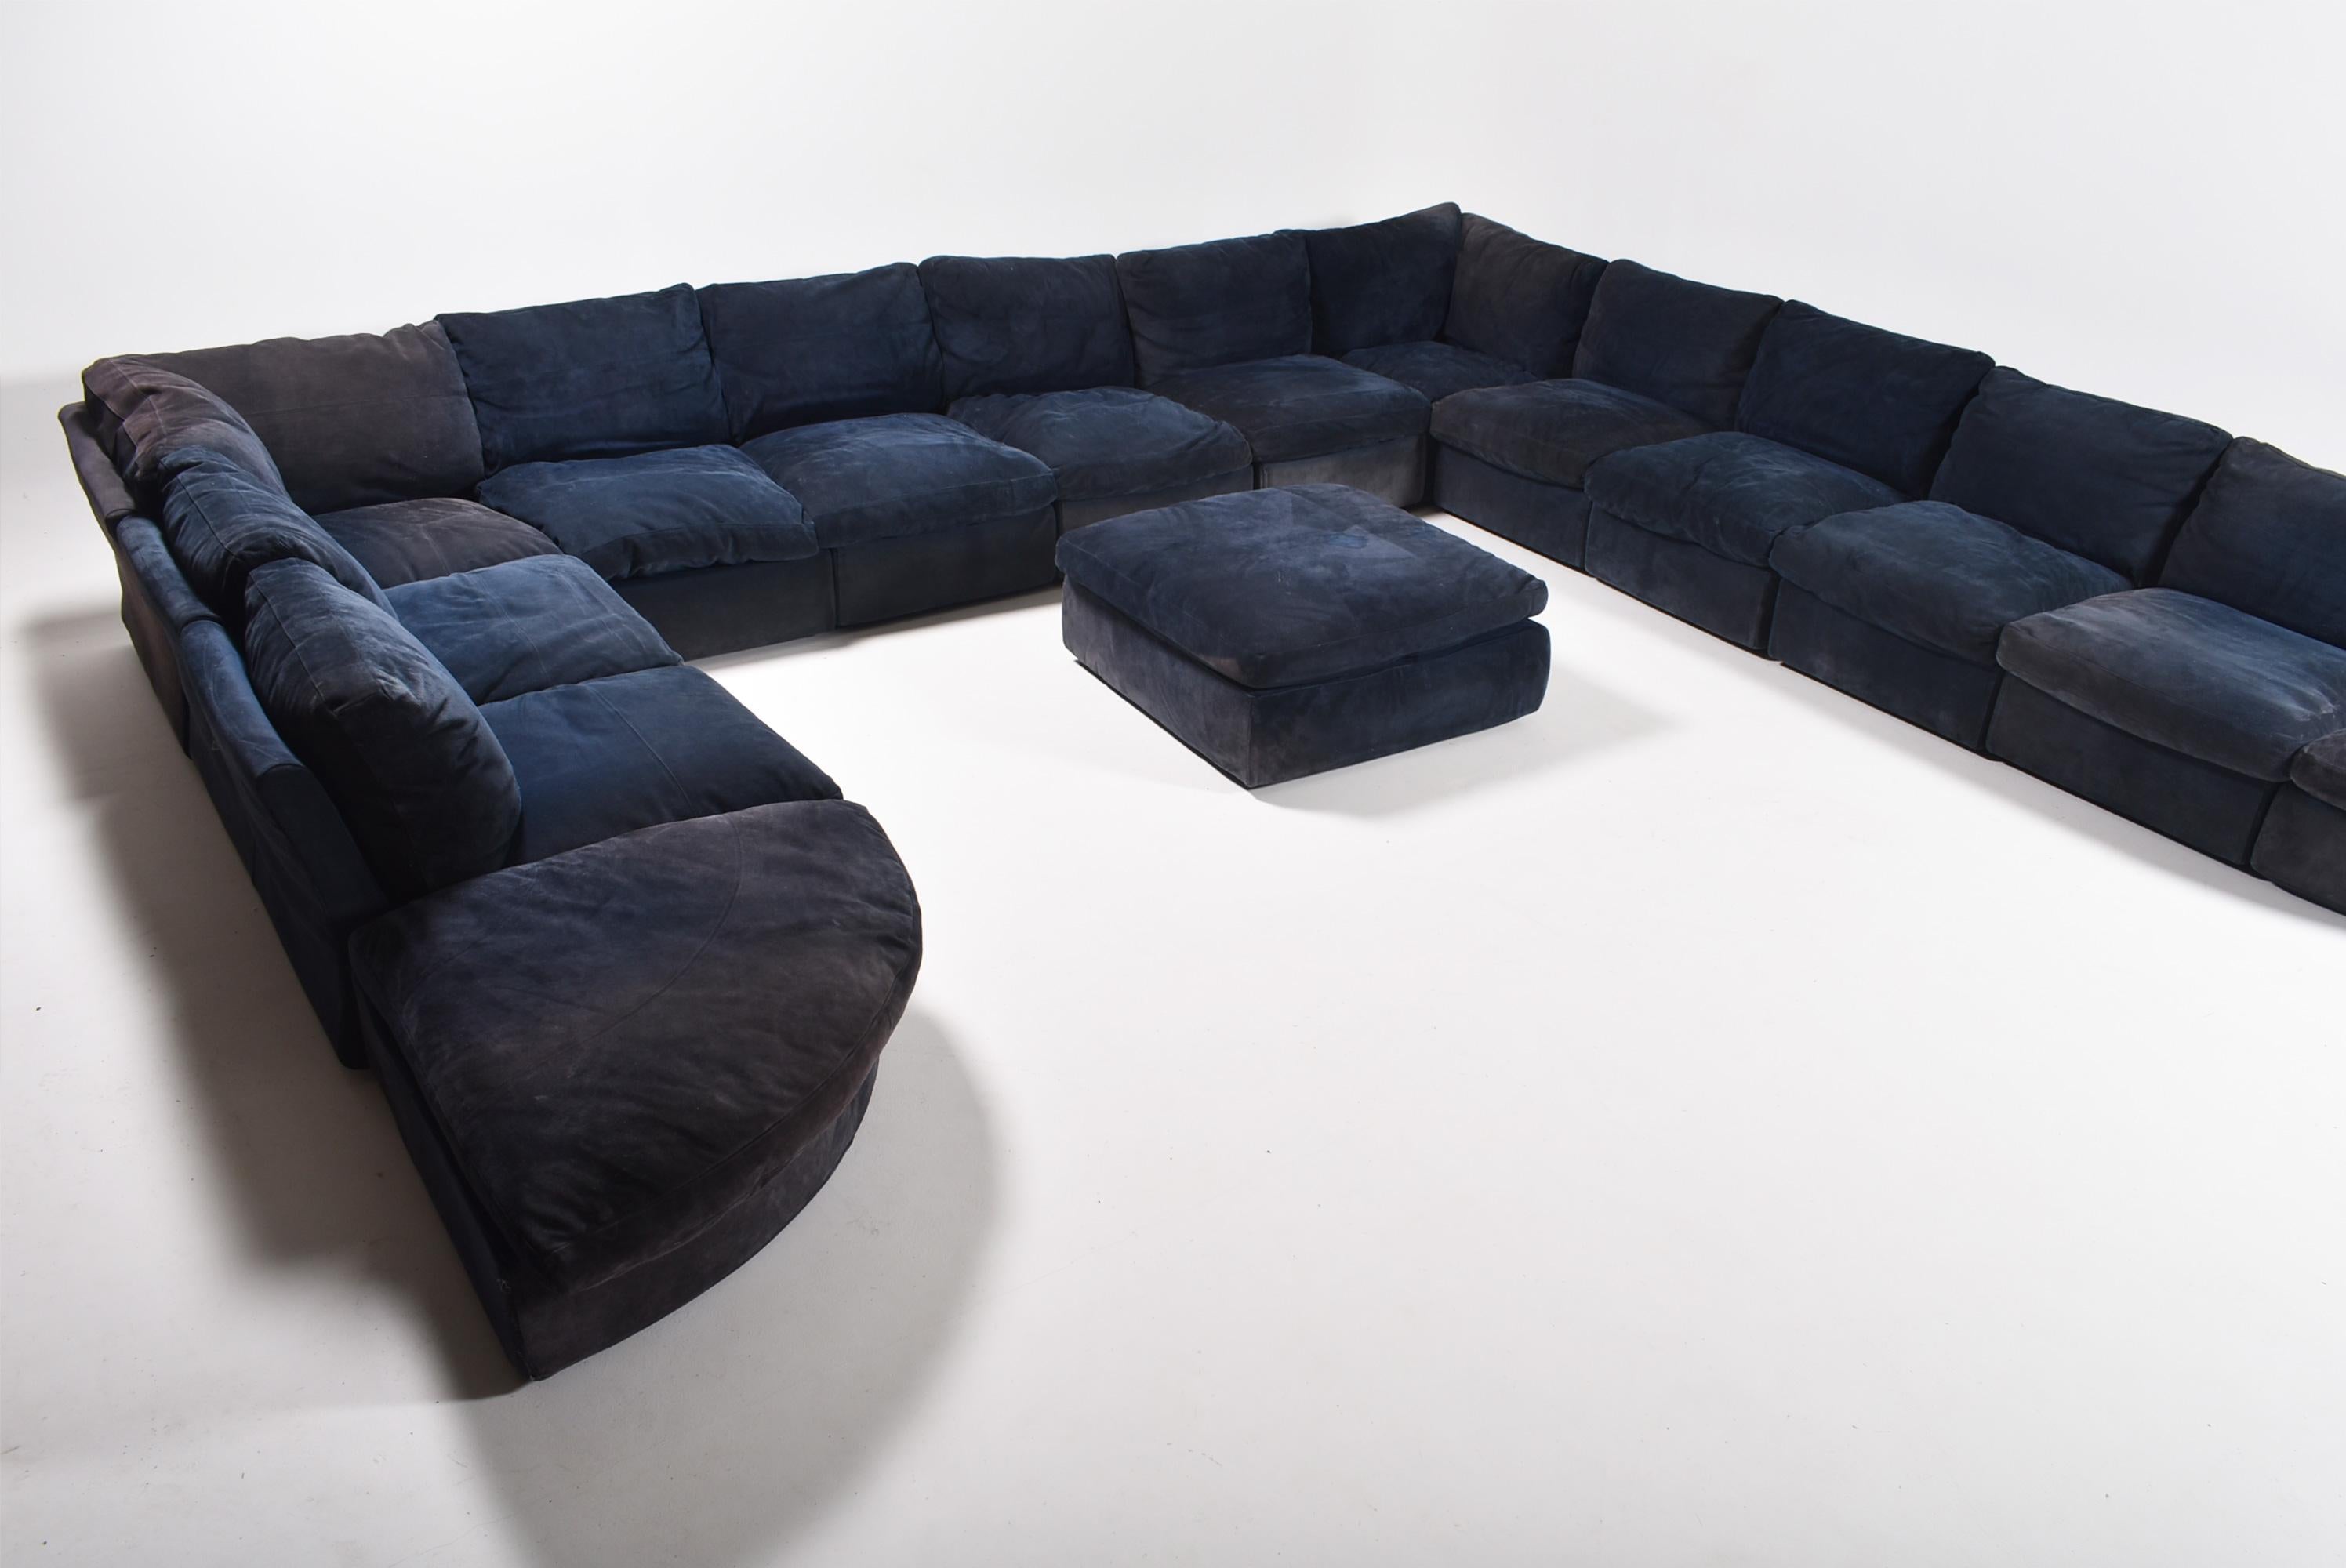 Exceptional sectional sofa, fully modular, in royal blue suede leather.
Made in Paris by Steiner, this sofa is the epitome of the brand.
It has fifteen elements:
-Ten seats
-Two angles
-Two round angles
-One ottoman
The cushions are filled